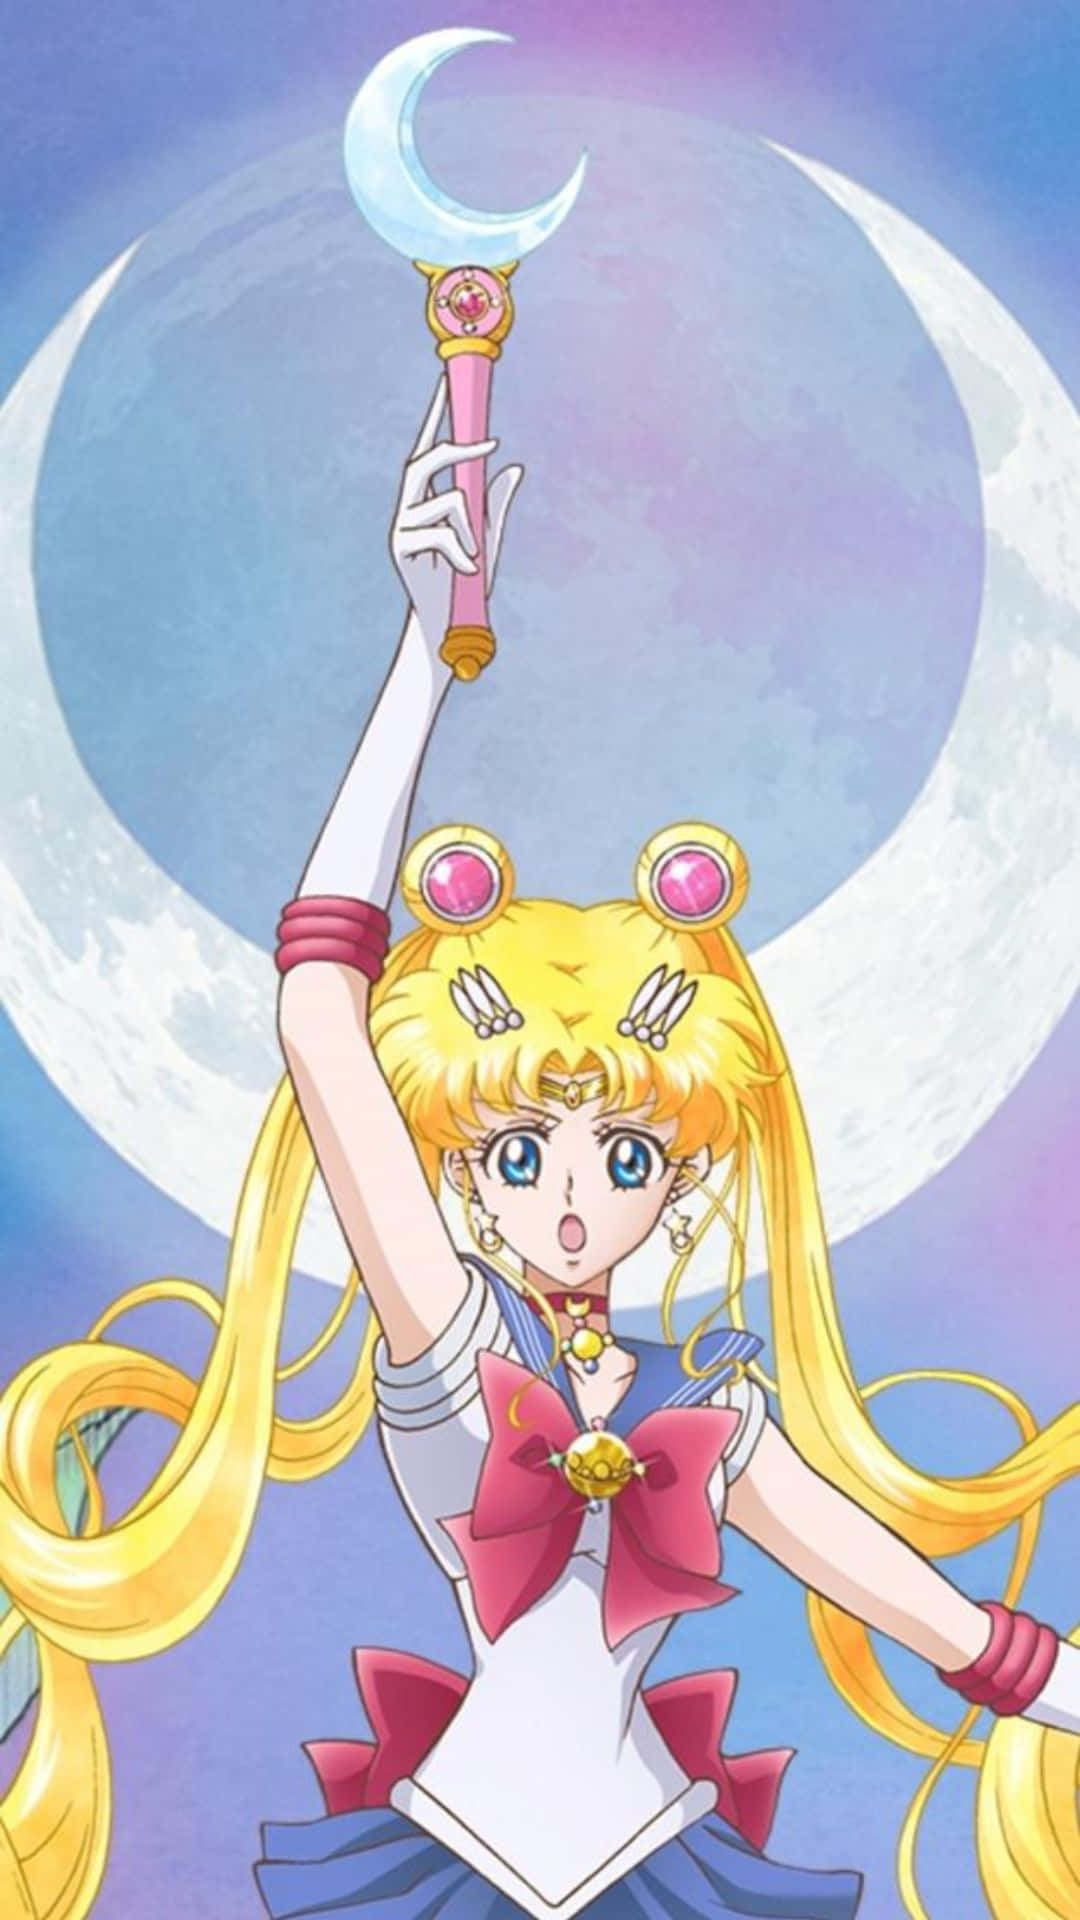 Get stuck in the world of Sailor Moon with the new iPad! Wallpaper